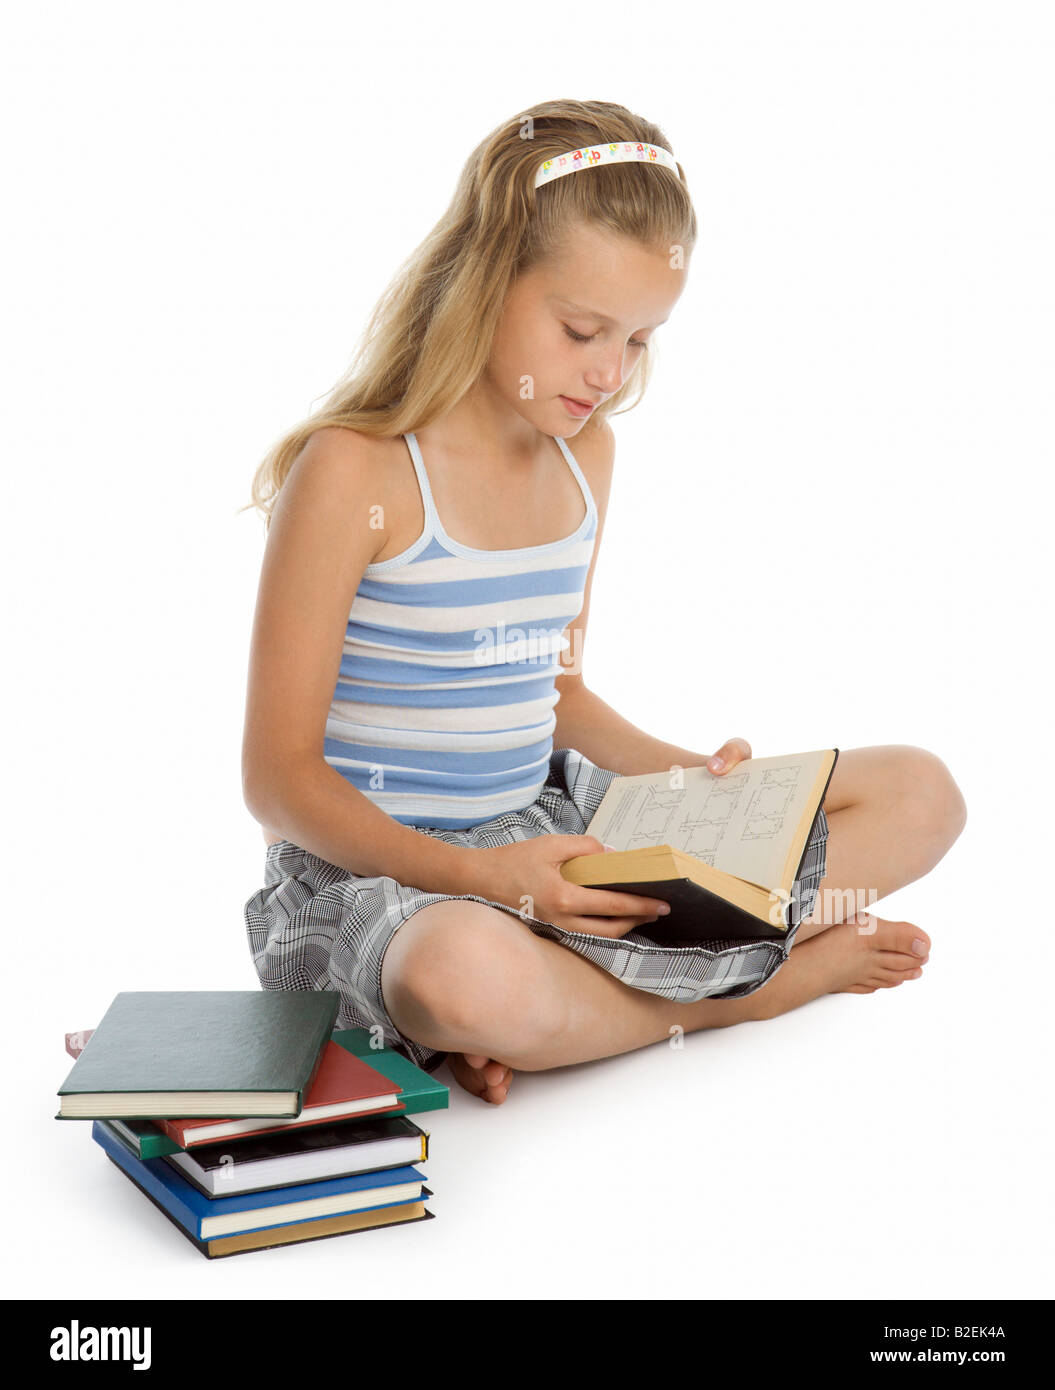 Pretty teenager girl sit on floor and reading book Stock Photo